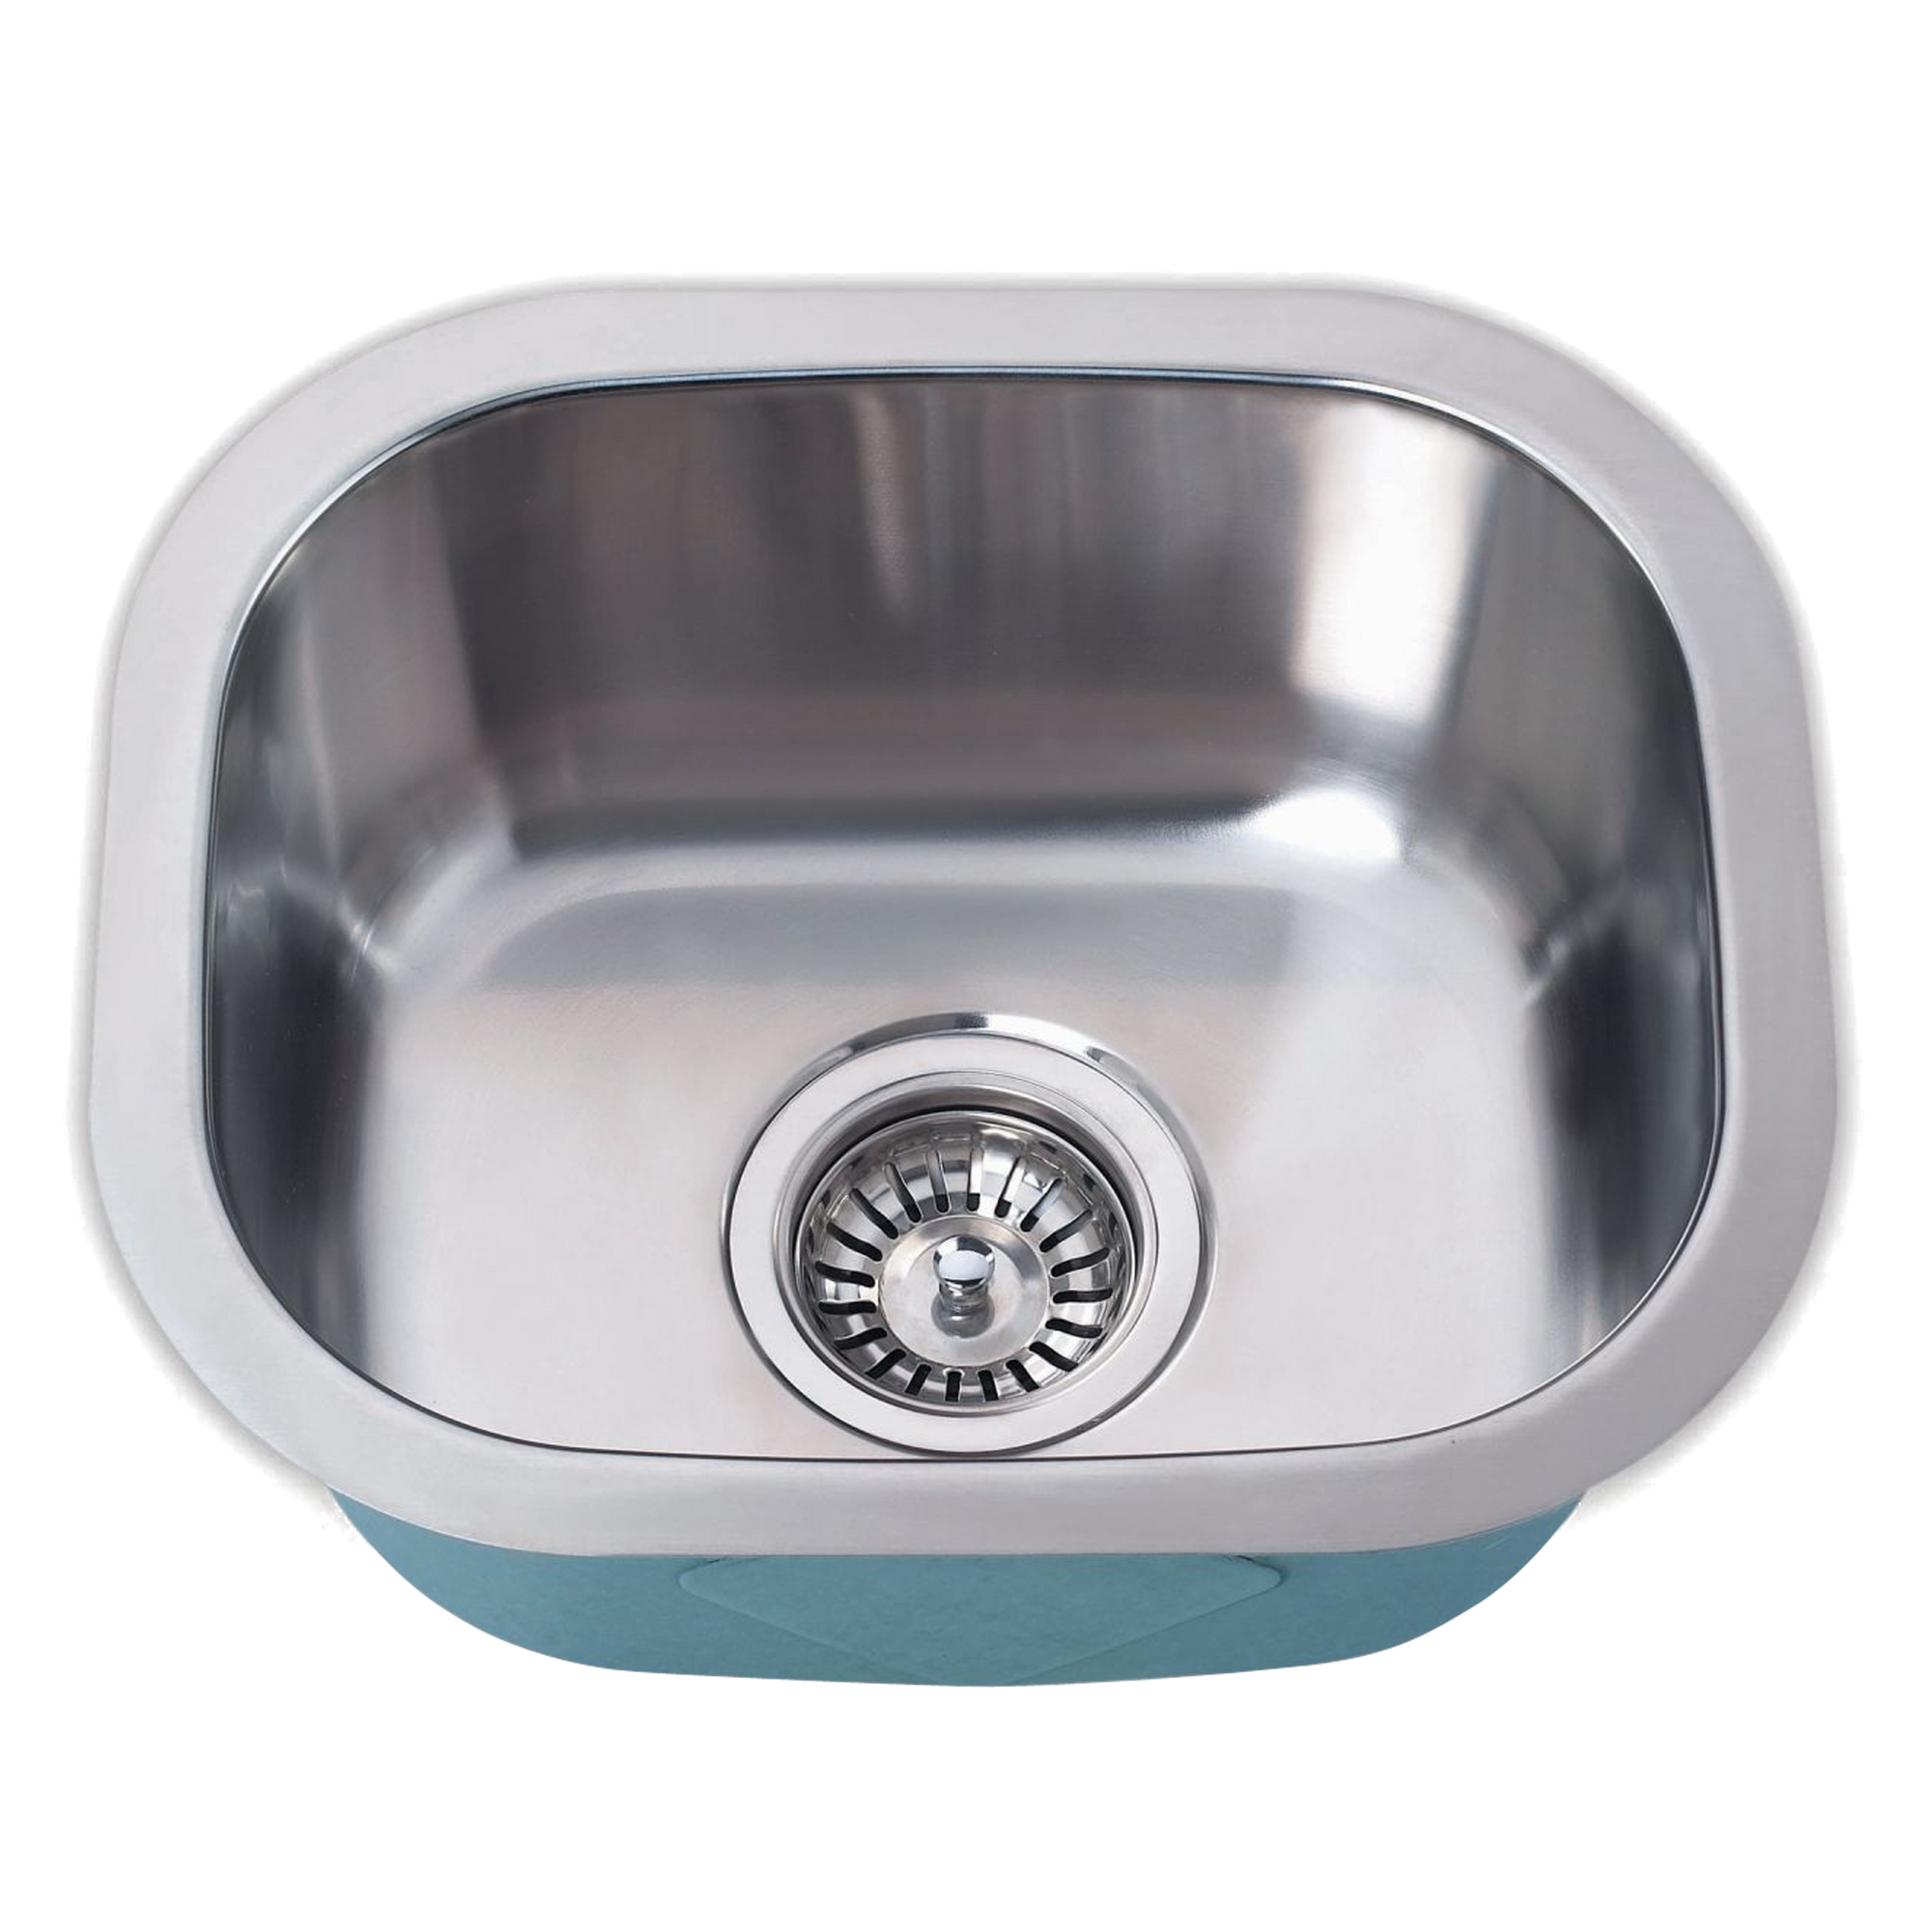 A seamless, contemporary, stainless steel kitchen sink for under mount application.